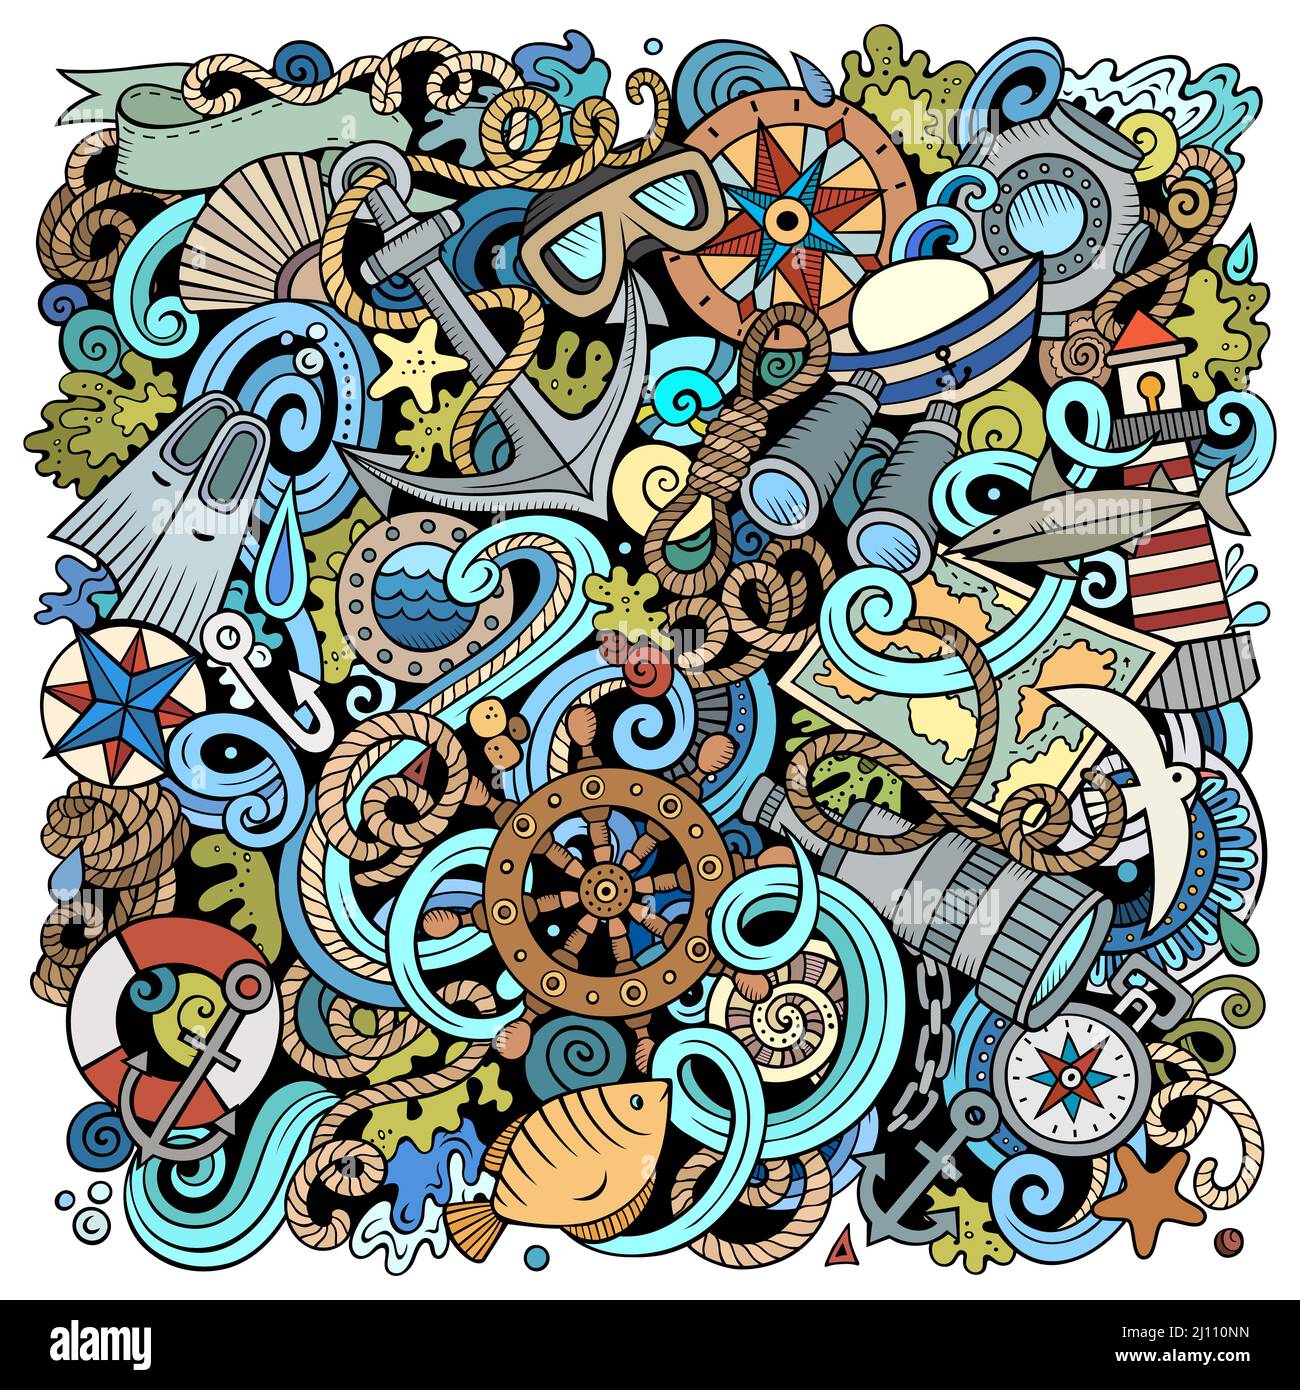 Nautical hand drawn vector doodles funny illustration. Stock Vector